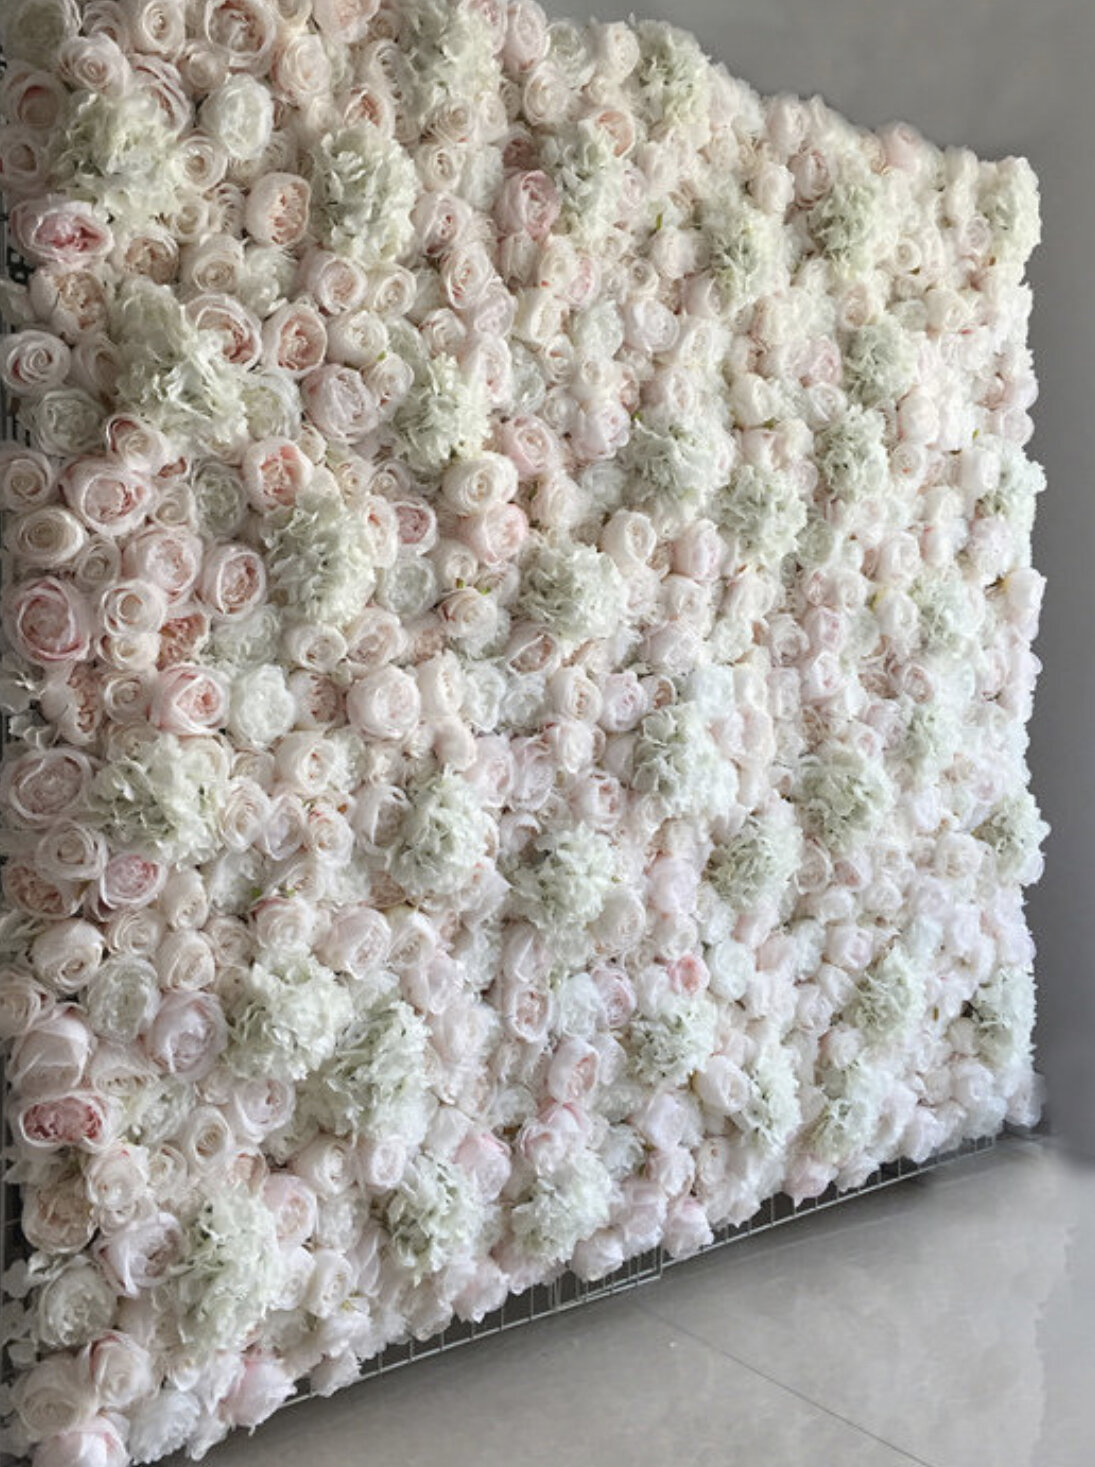 FLOWER FOAM 20 INCH ROSE IVORY Rentals Naples FL, Where to Rent